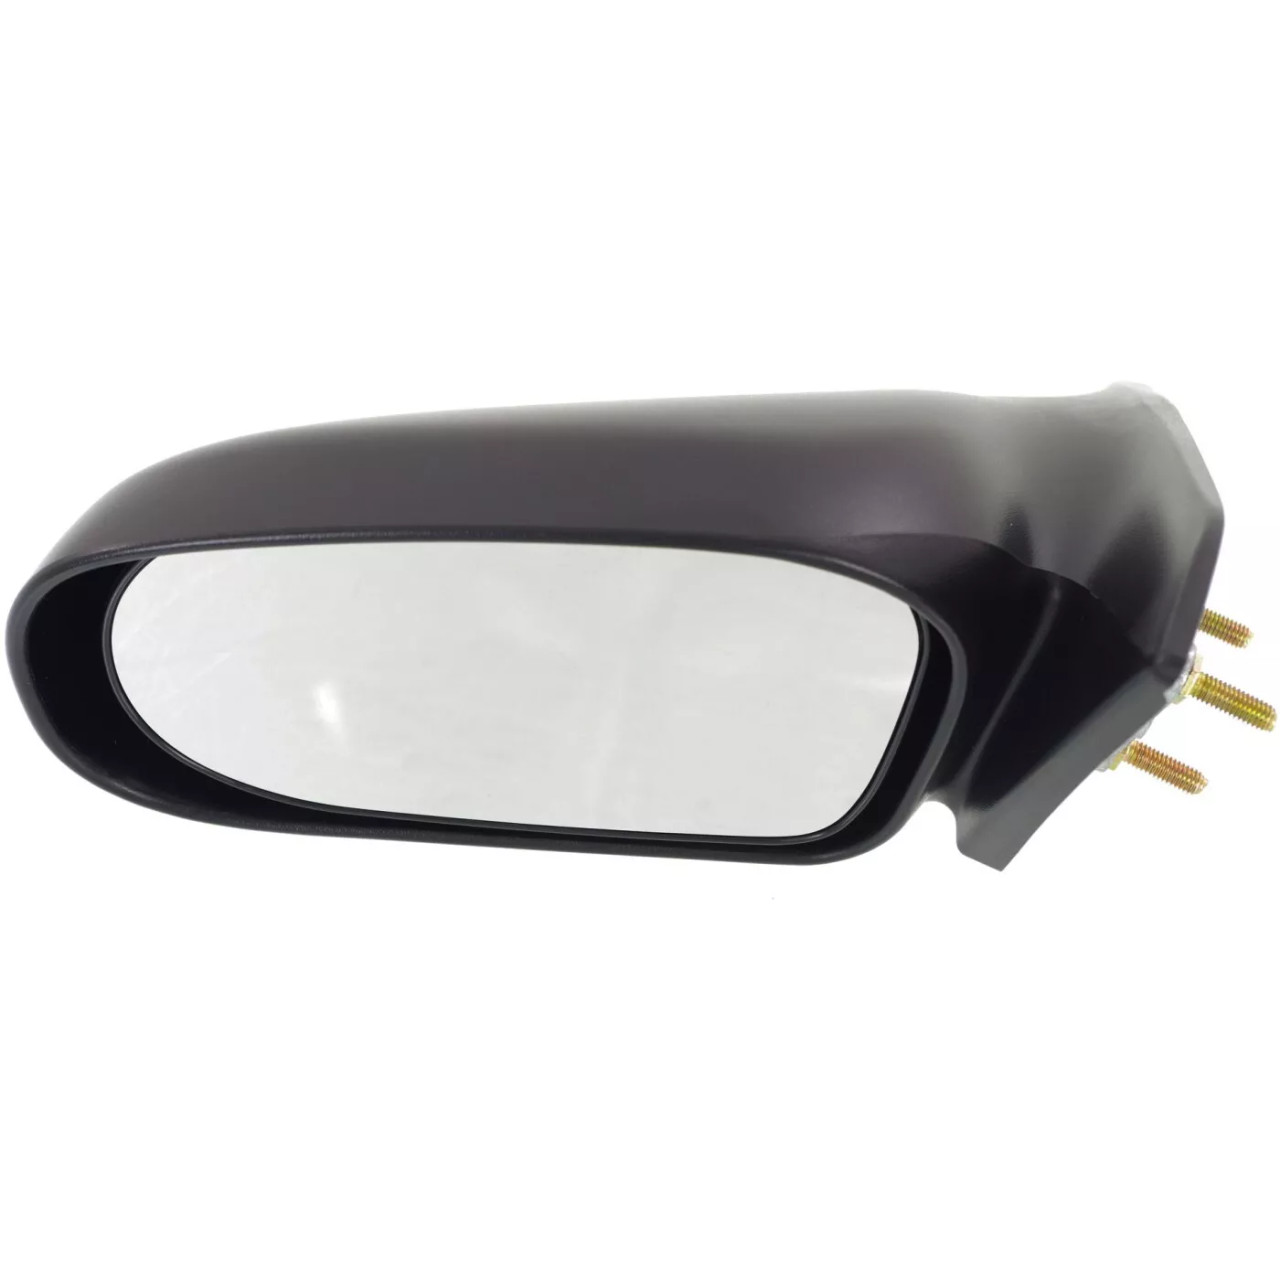 Manual Mirror For 1995-1999 Toyota Tercel Driver Side Textured Black